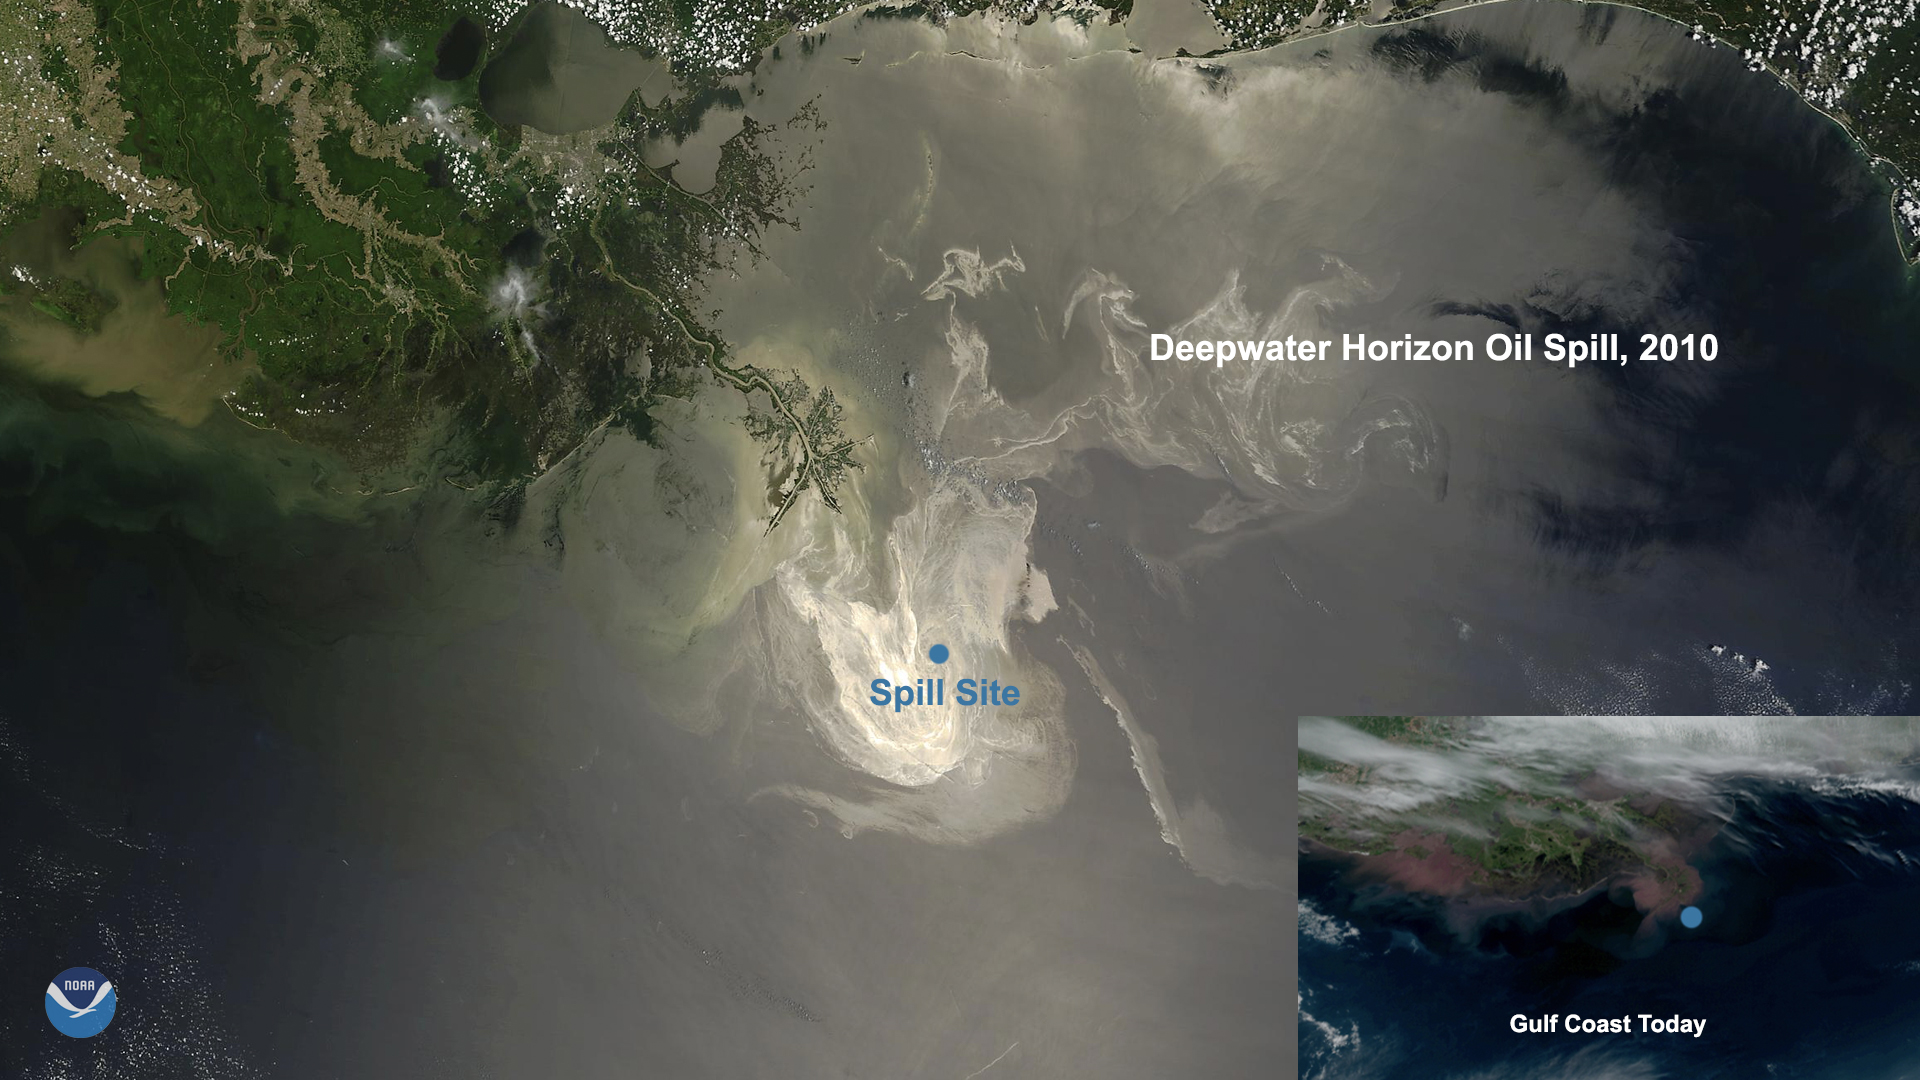 Aerial view of Deepwater Horizon oil spill showing the vast scale of the disaster